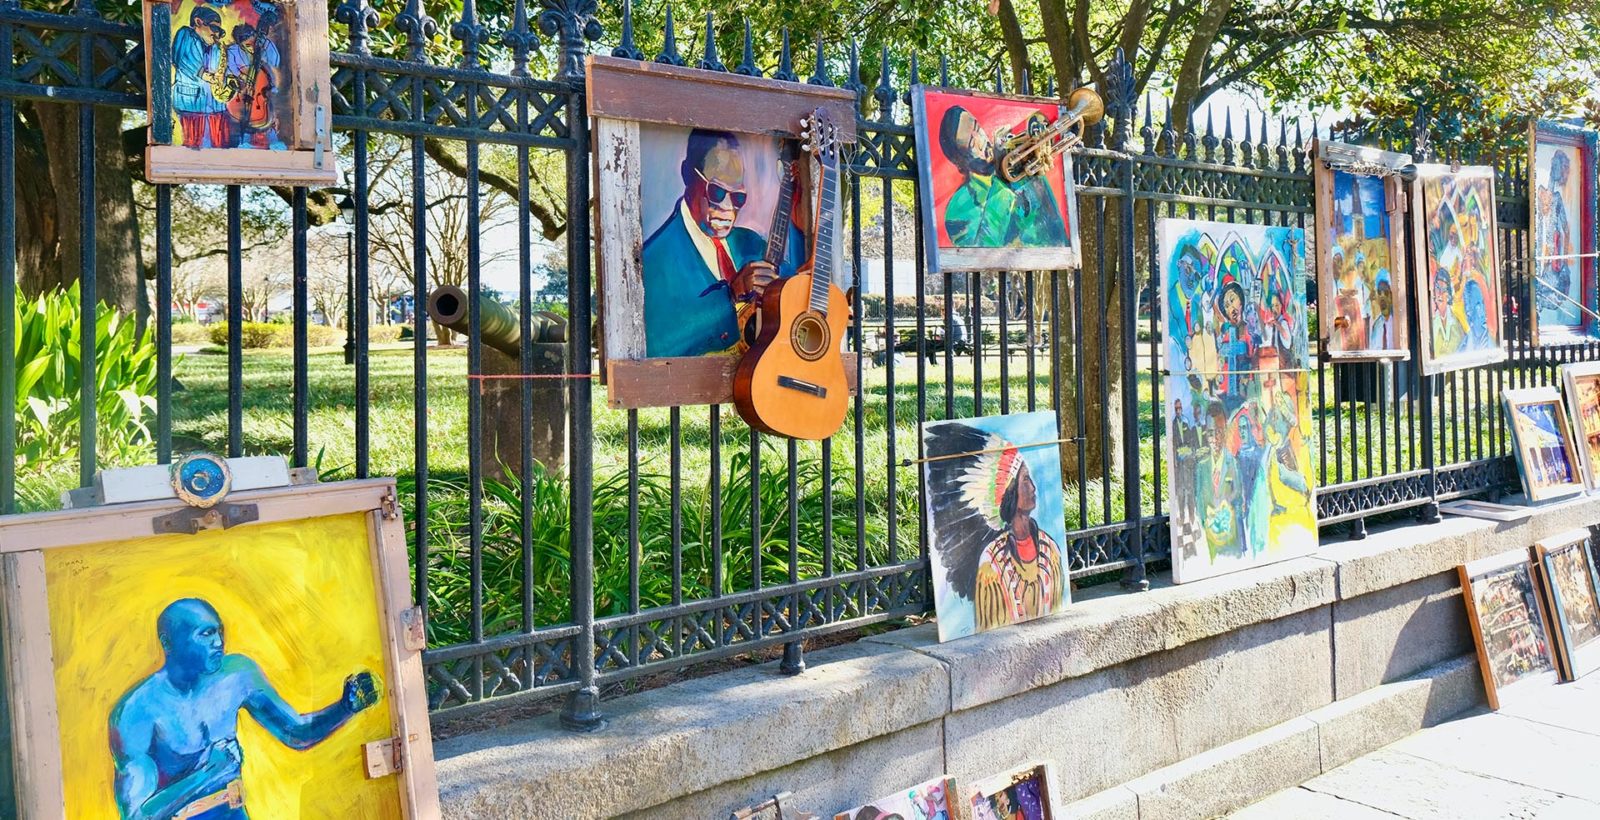 variety of artwork being sold on a fence by the park